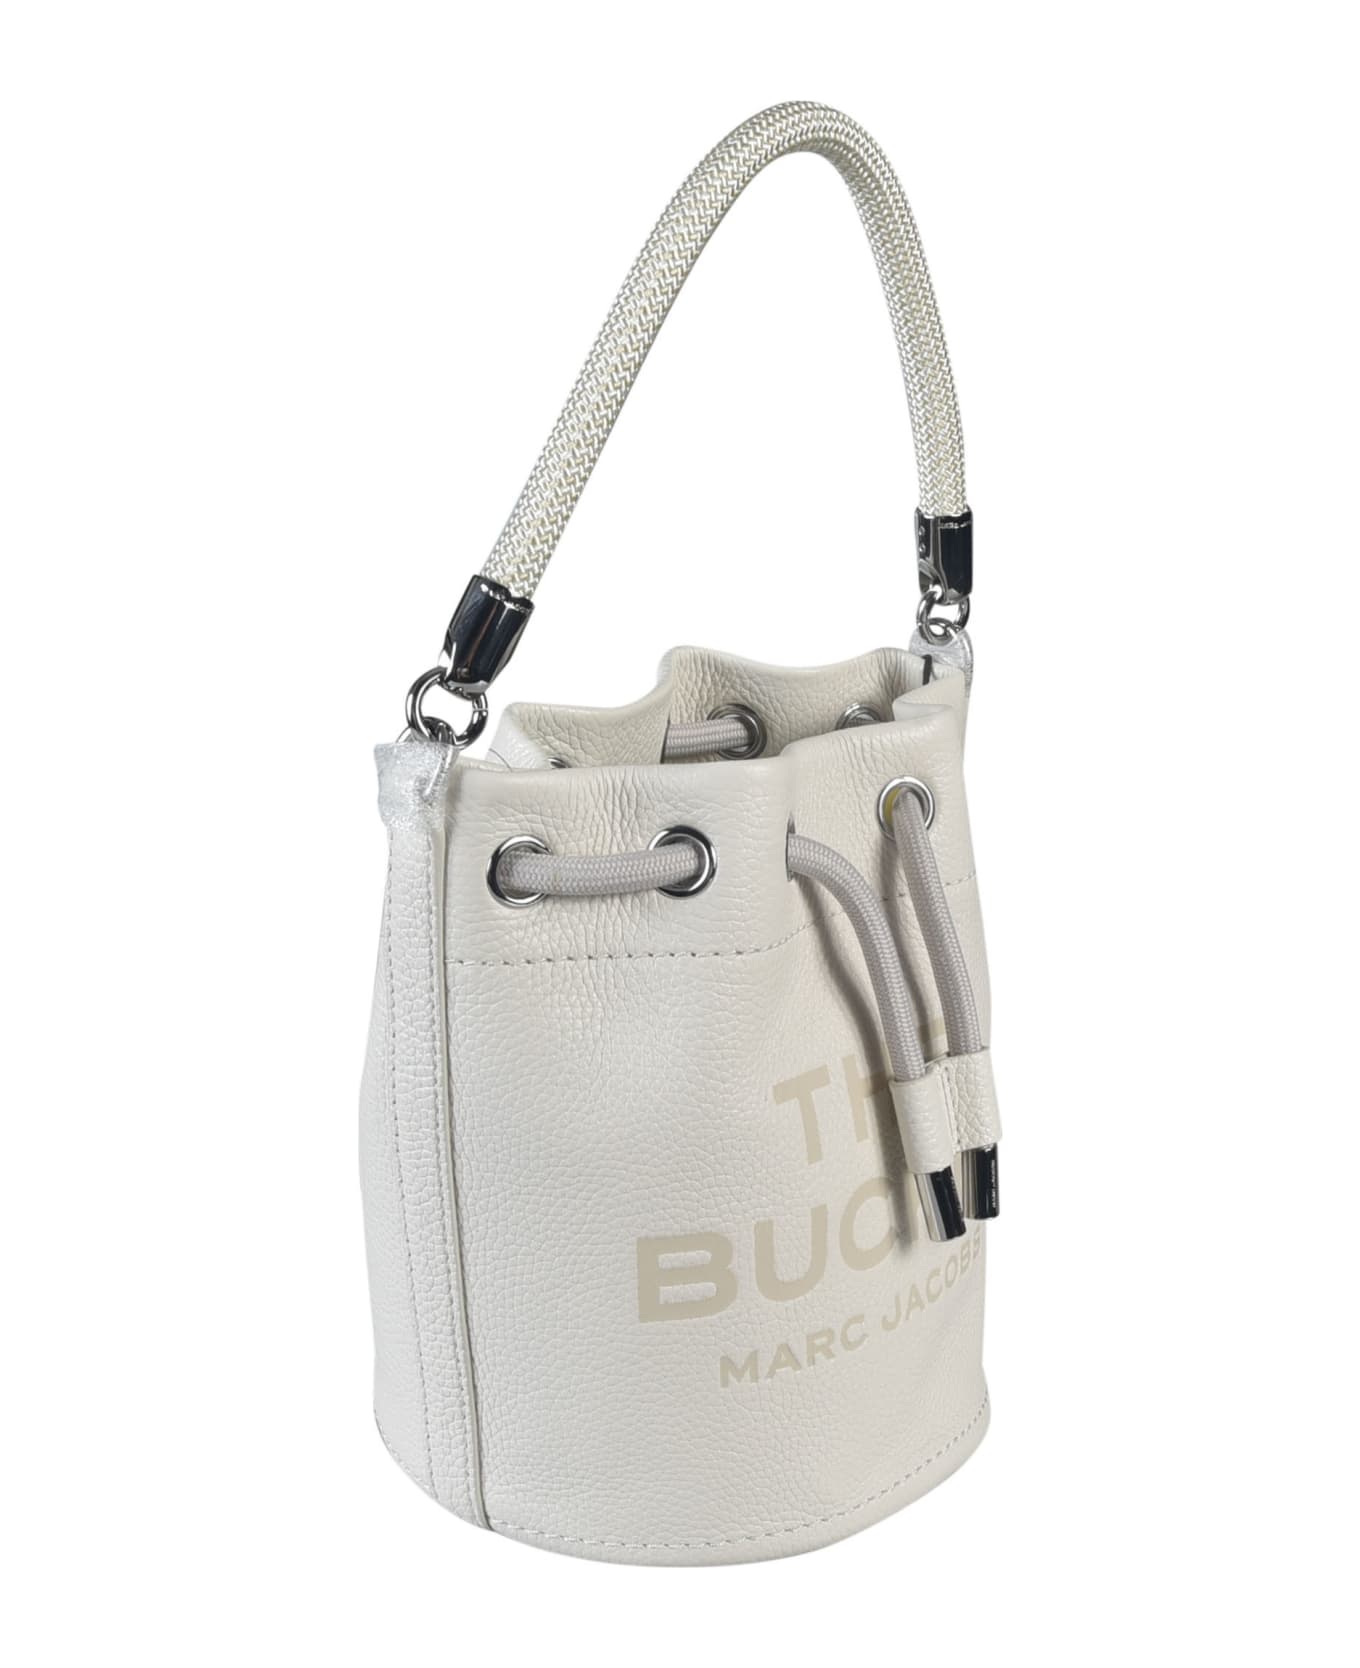 Marc Jacobs The Bucket - Bucket Bag - White トートバッグ